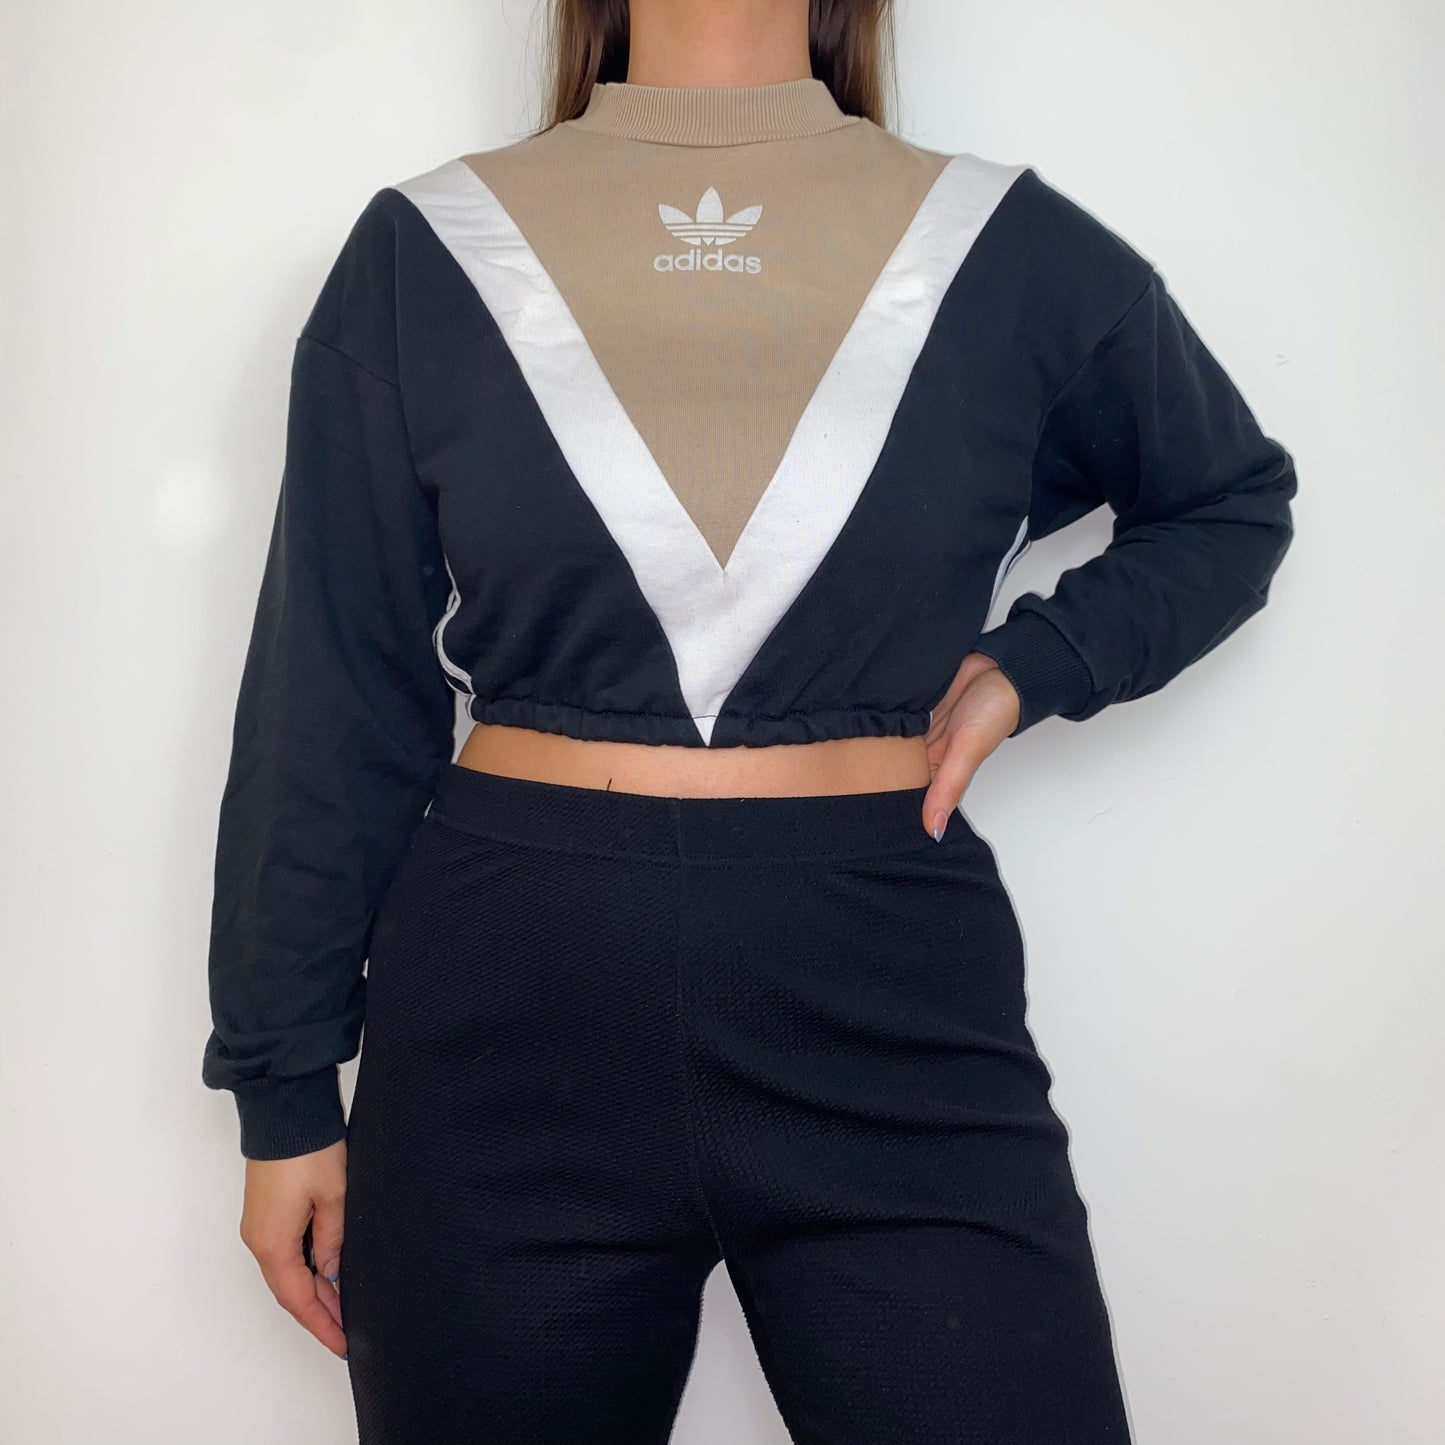 black and beige cropped hoodie with white adidas logo shown on a model wearing black trousers